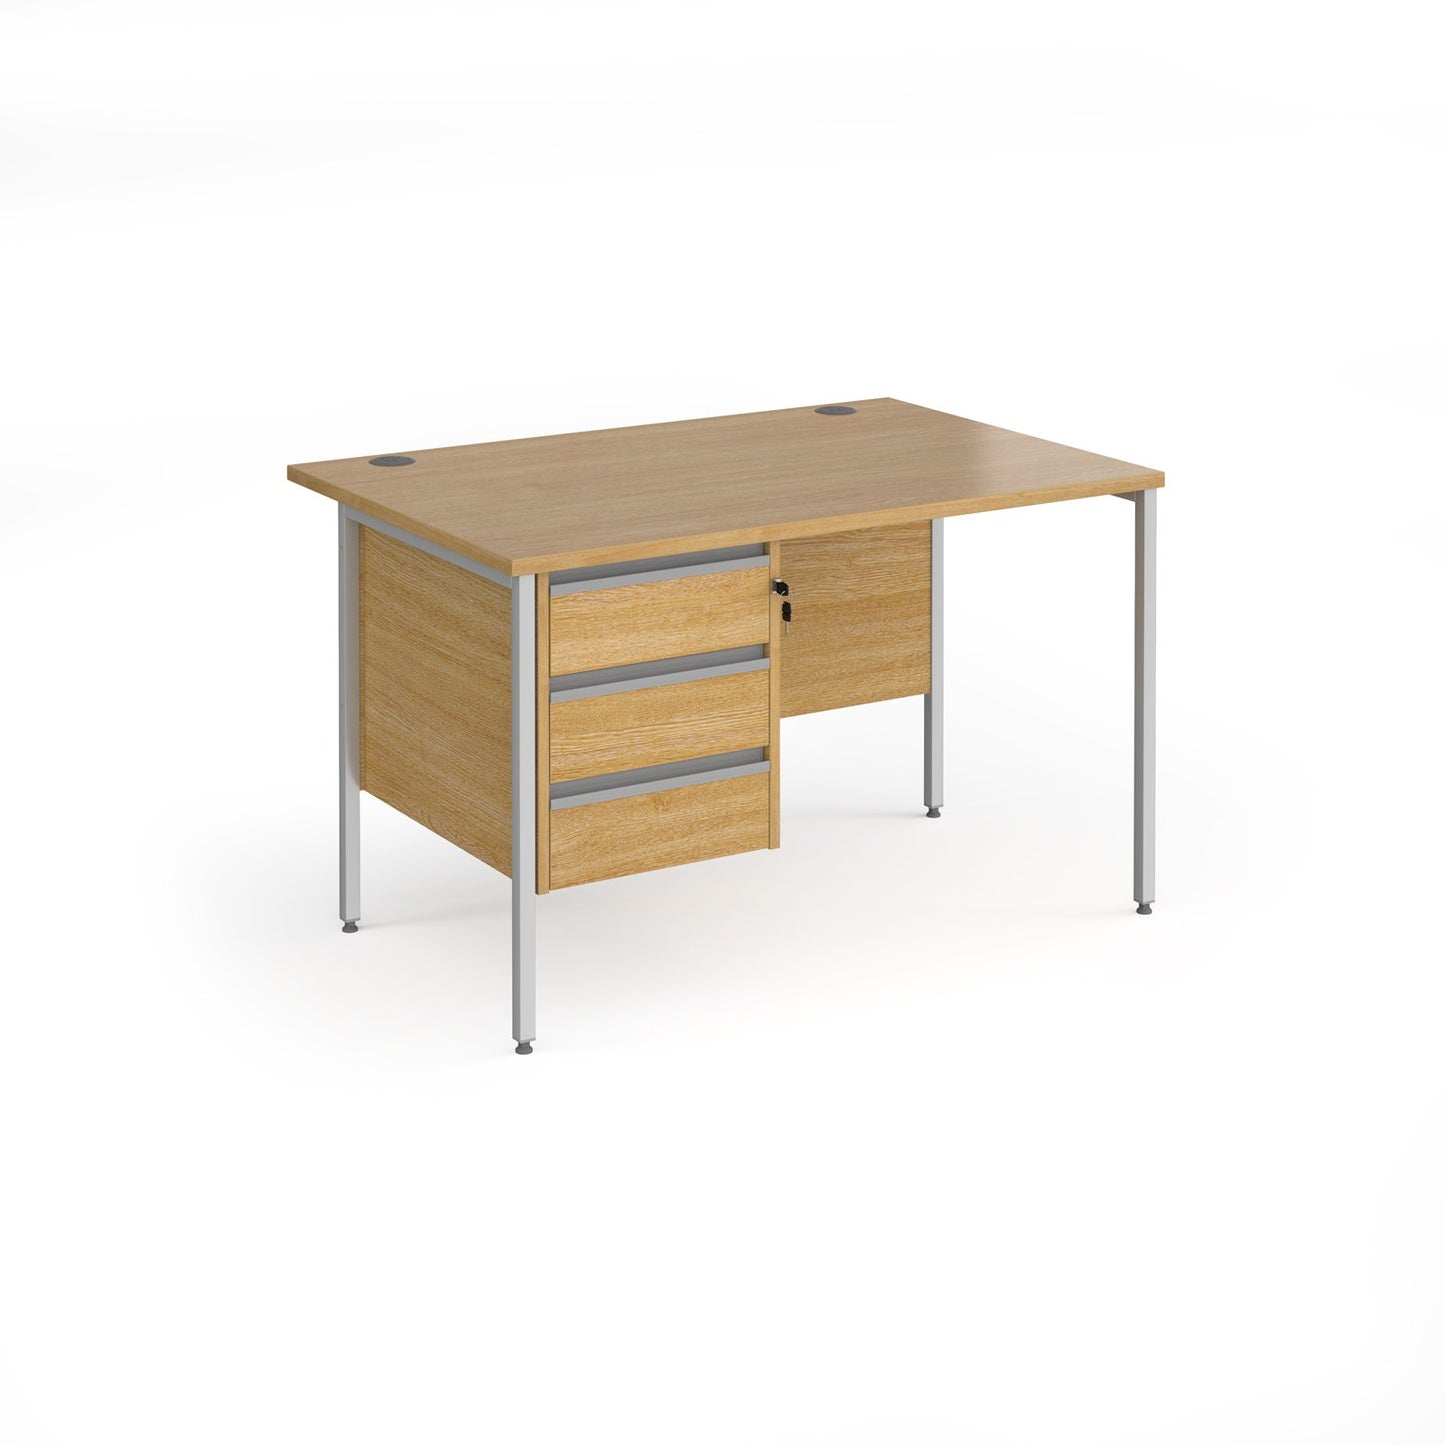 Contract 25 H-Frame straight desk with 3 drawer pedestal